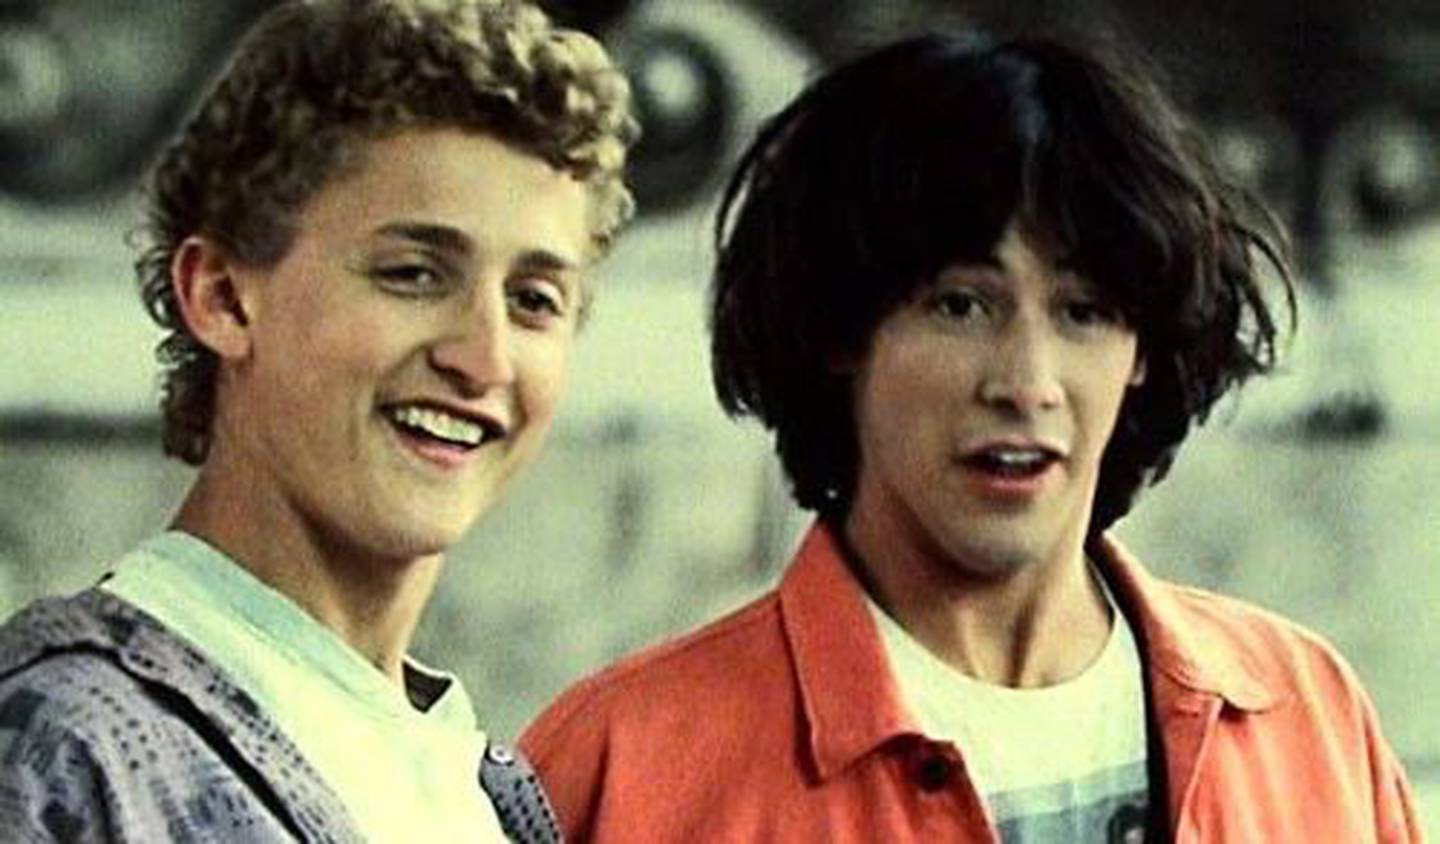 Bill (Alex Winter) and Ted (Keanu Reeves) in a scene from the 1989 film Bill & Ted's Excellent Adventure. Photo / Supplied